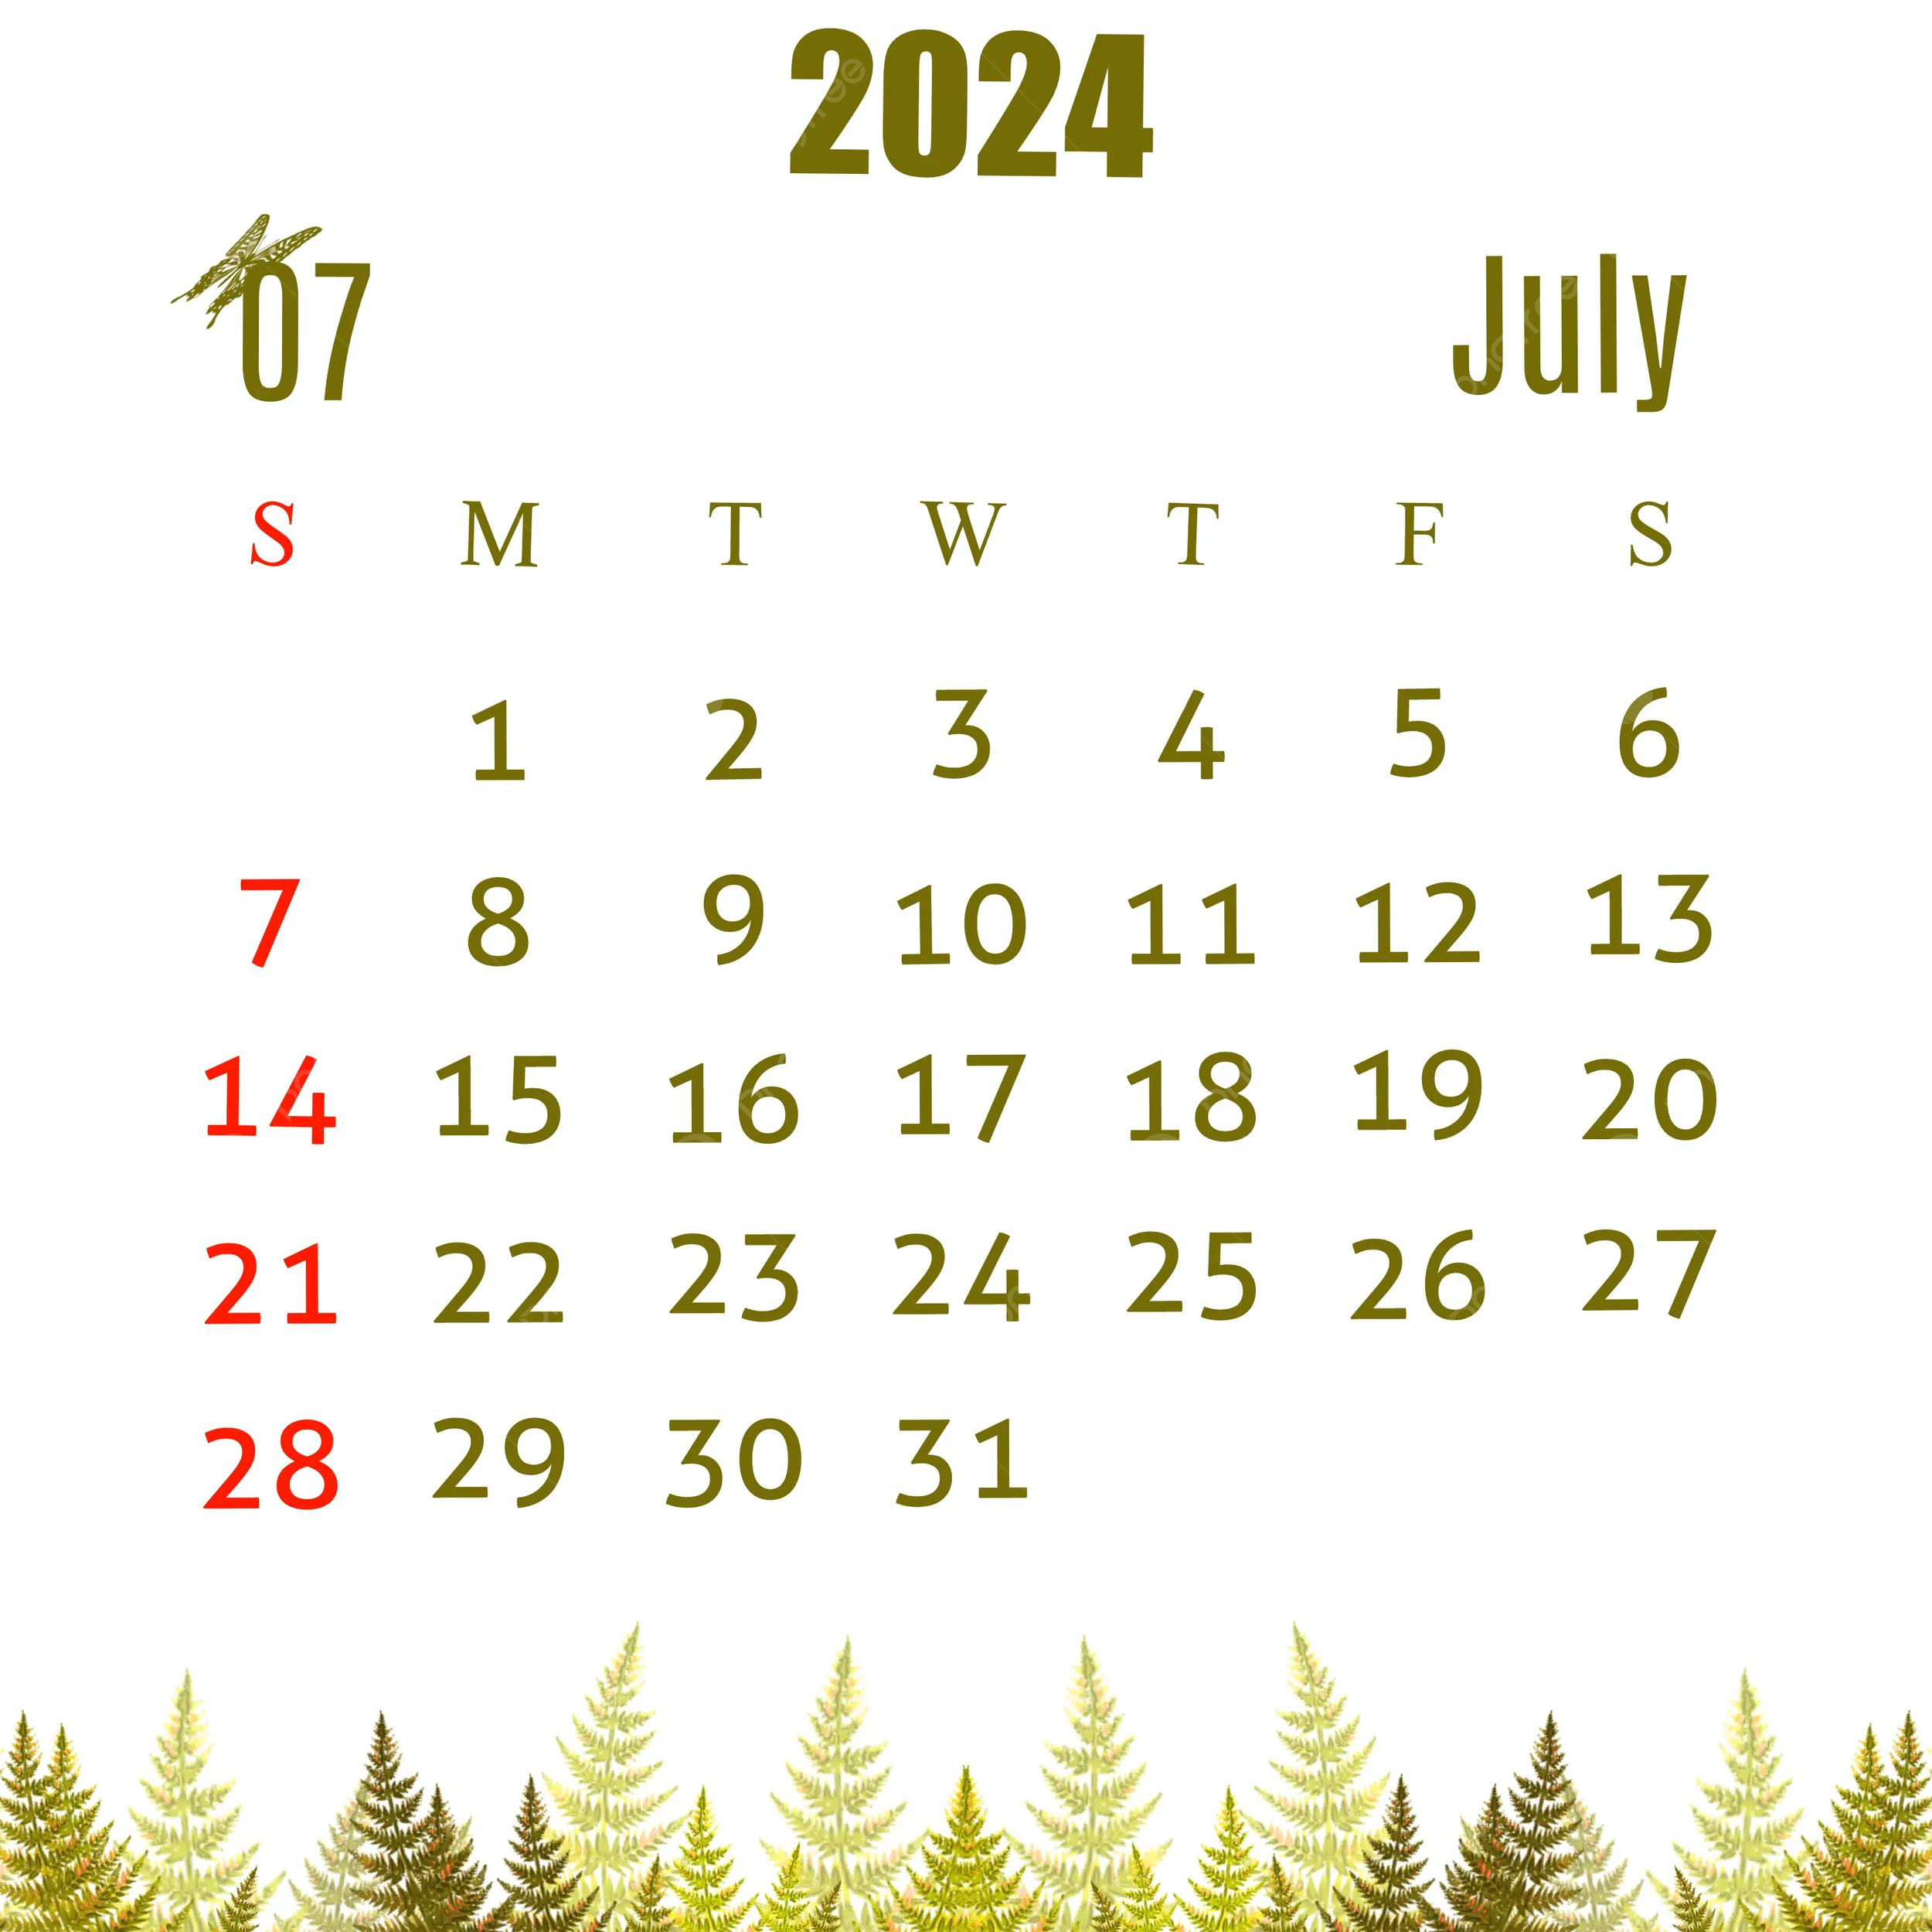 July 2024 Calendar Yellow Illustration Design Template Download On for Christmas in July Calendar 2024